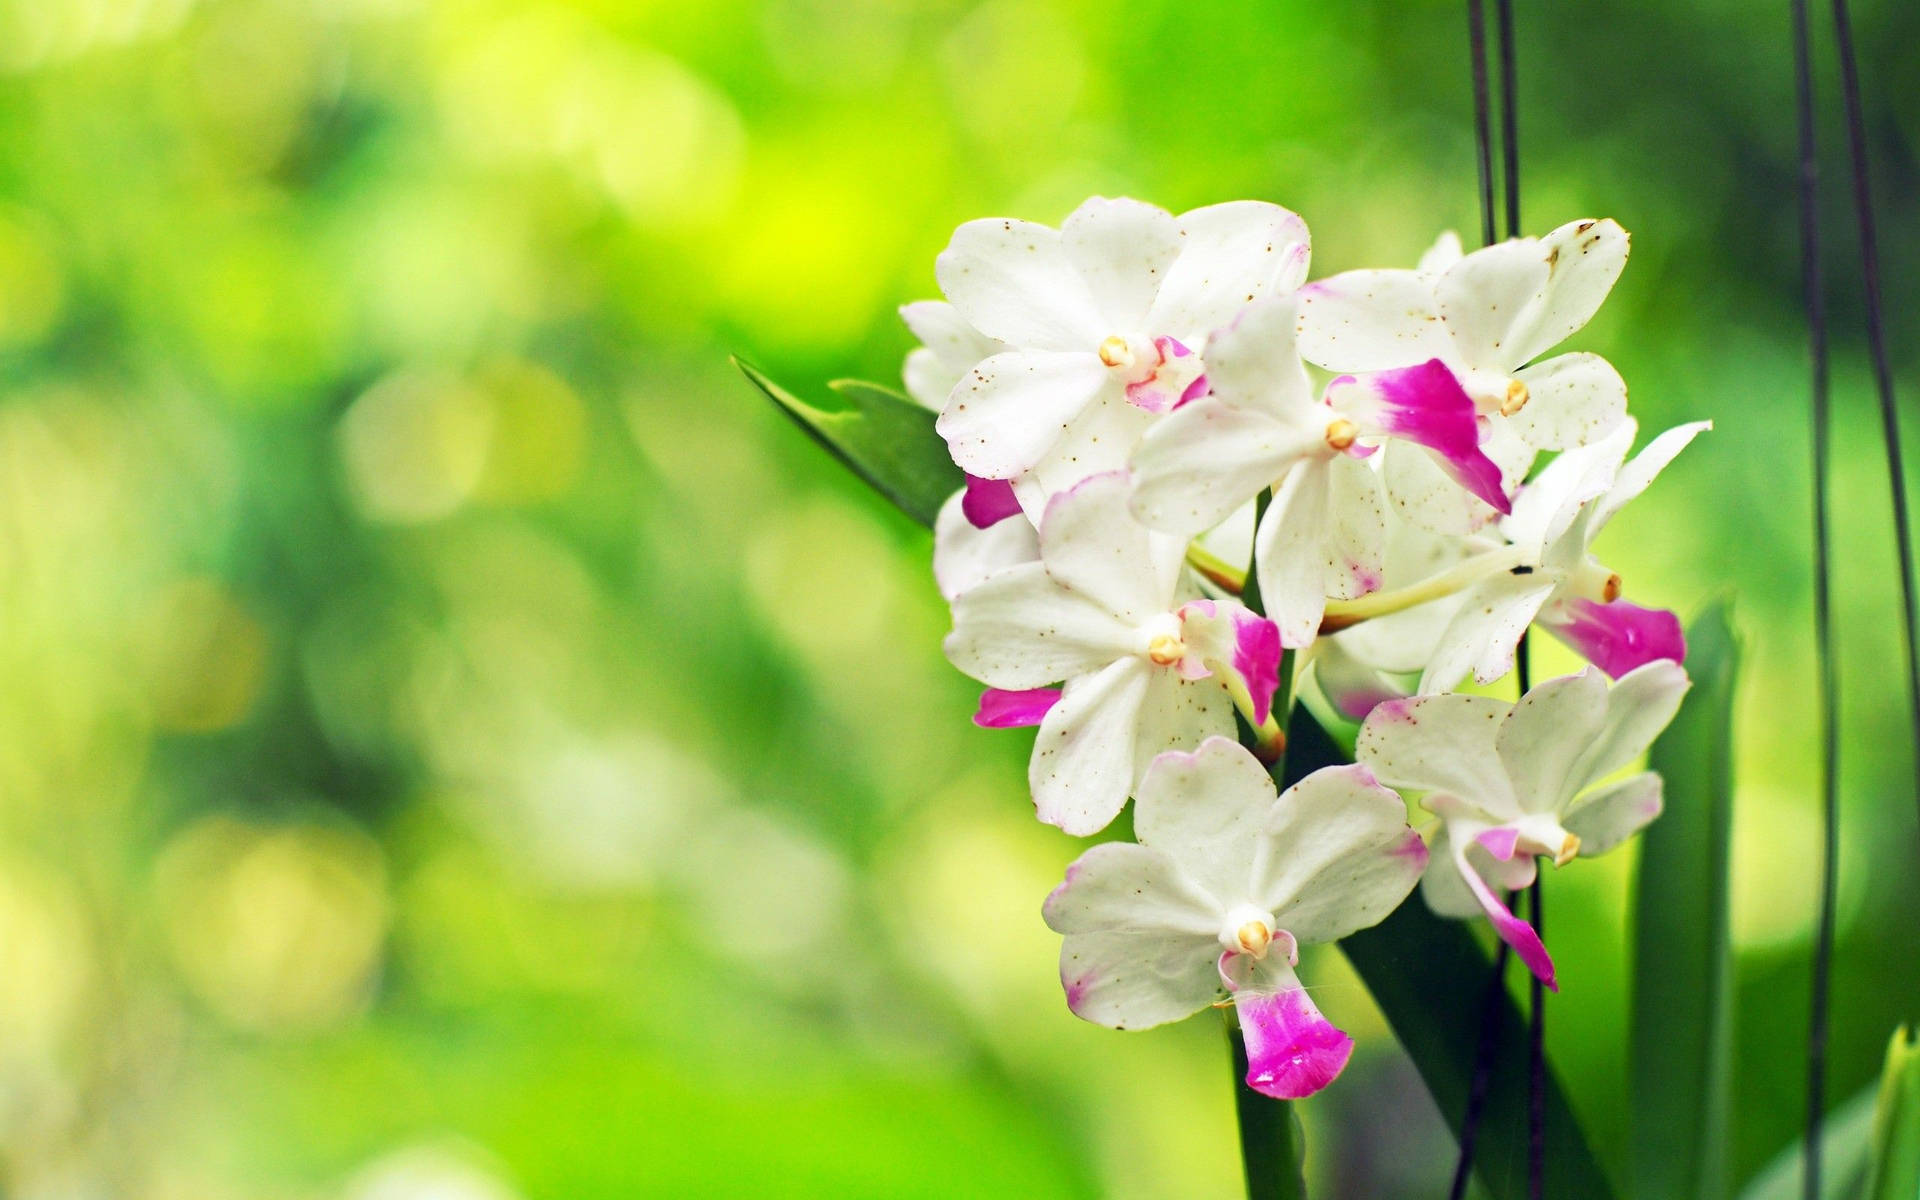 Enchanting Beauty Of White Orchid With Violet Petals